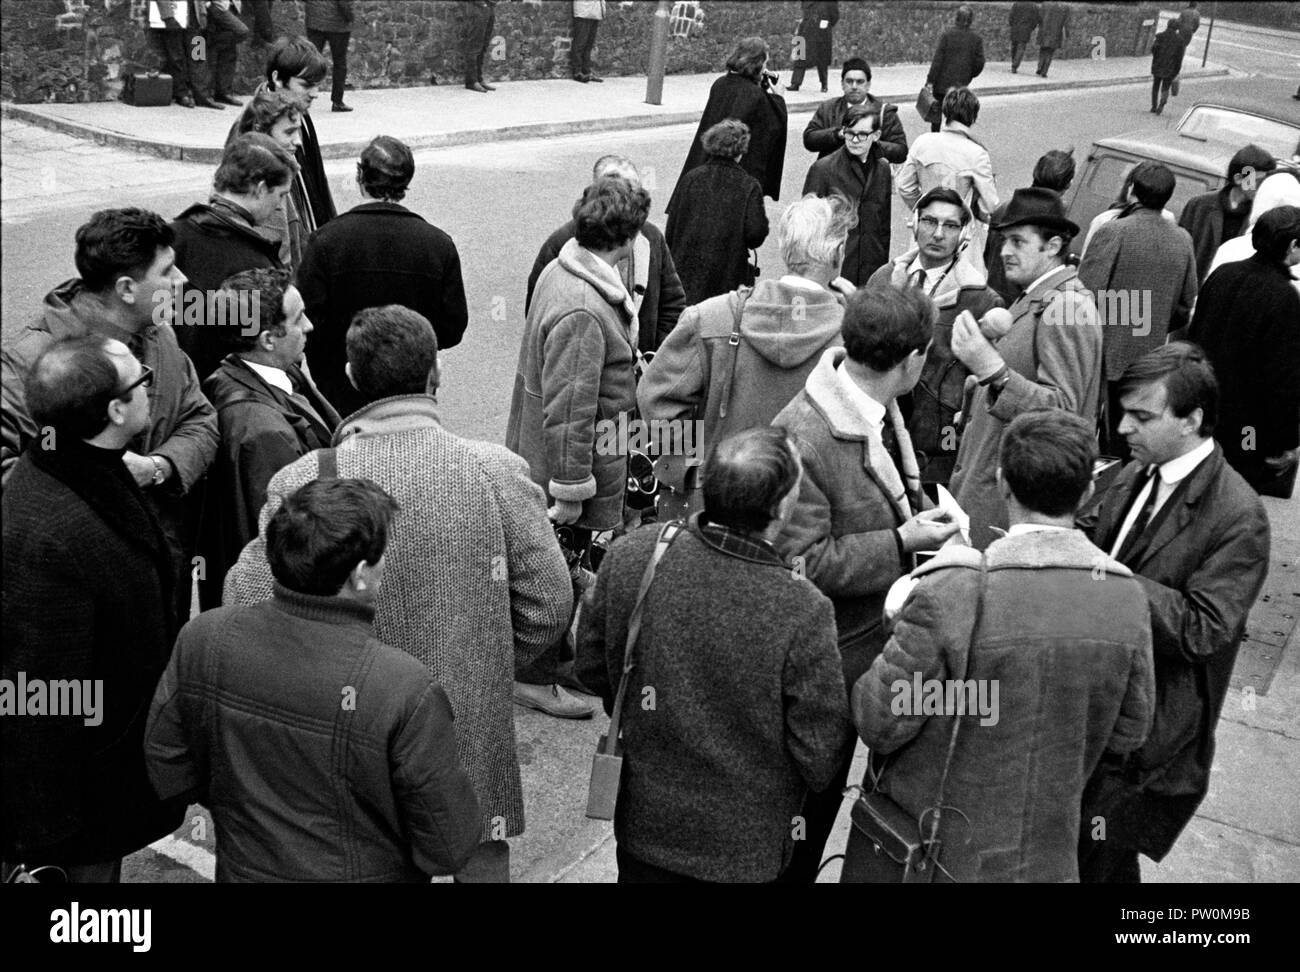 Reporters and news crews gather outside a student protest sit-in at Bristol University’s Senate House administrative building in 1968.  The students marched on the building on 5 December and stayed for 11 days.  They were campaigning for a greater say in the running of the university.  They also wanted the university’s students’ union to be opened up to students from other educational establishments in the city. Stock Photo